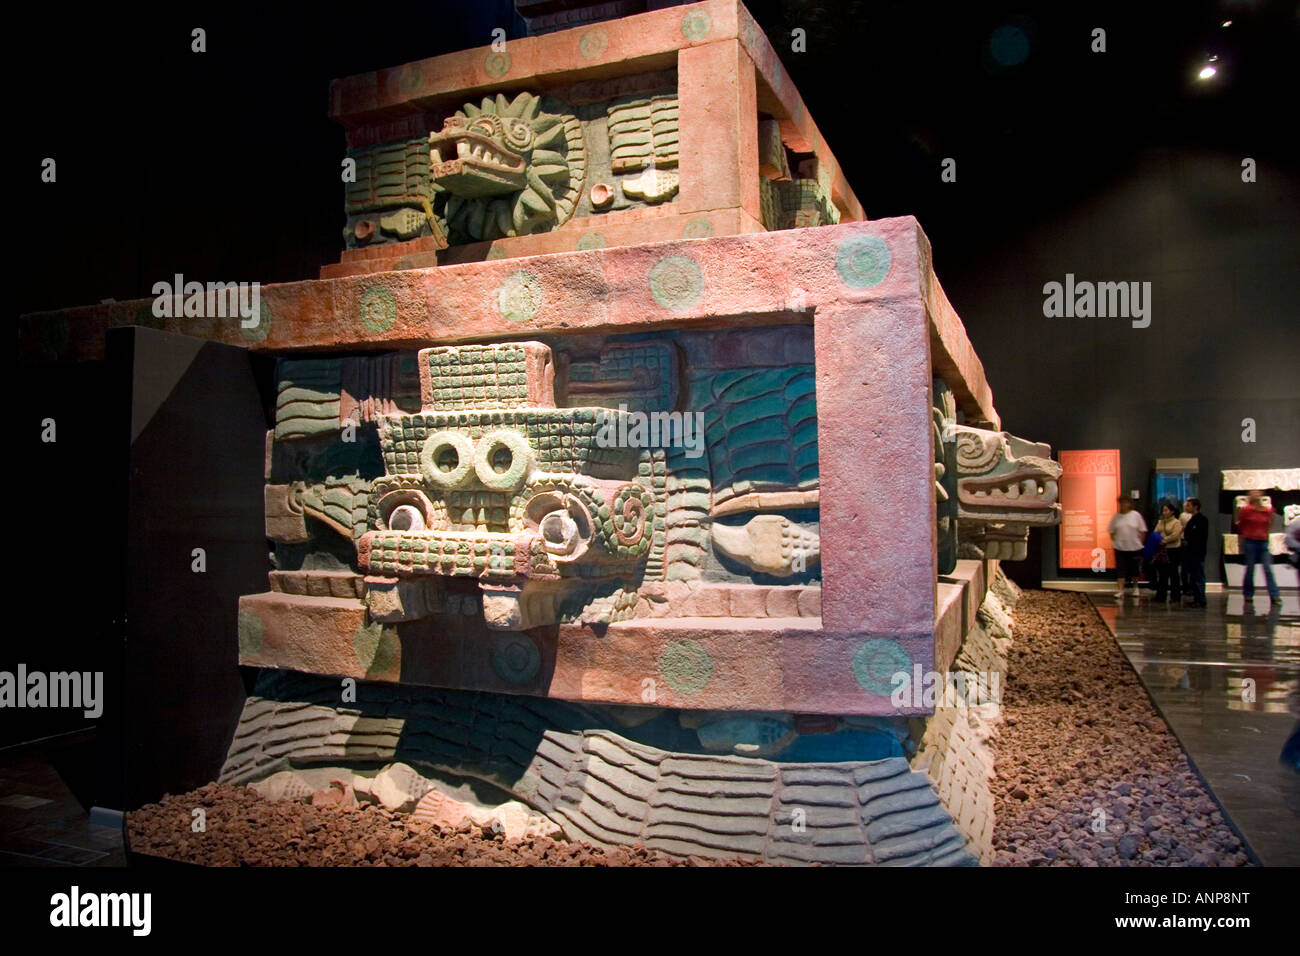 Artifacts from Teotihuacan on display at the National Museum of Anthropology in Mexico City Mexico Stock Photo